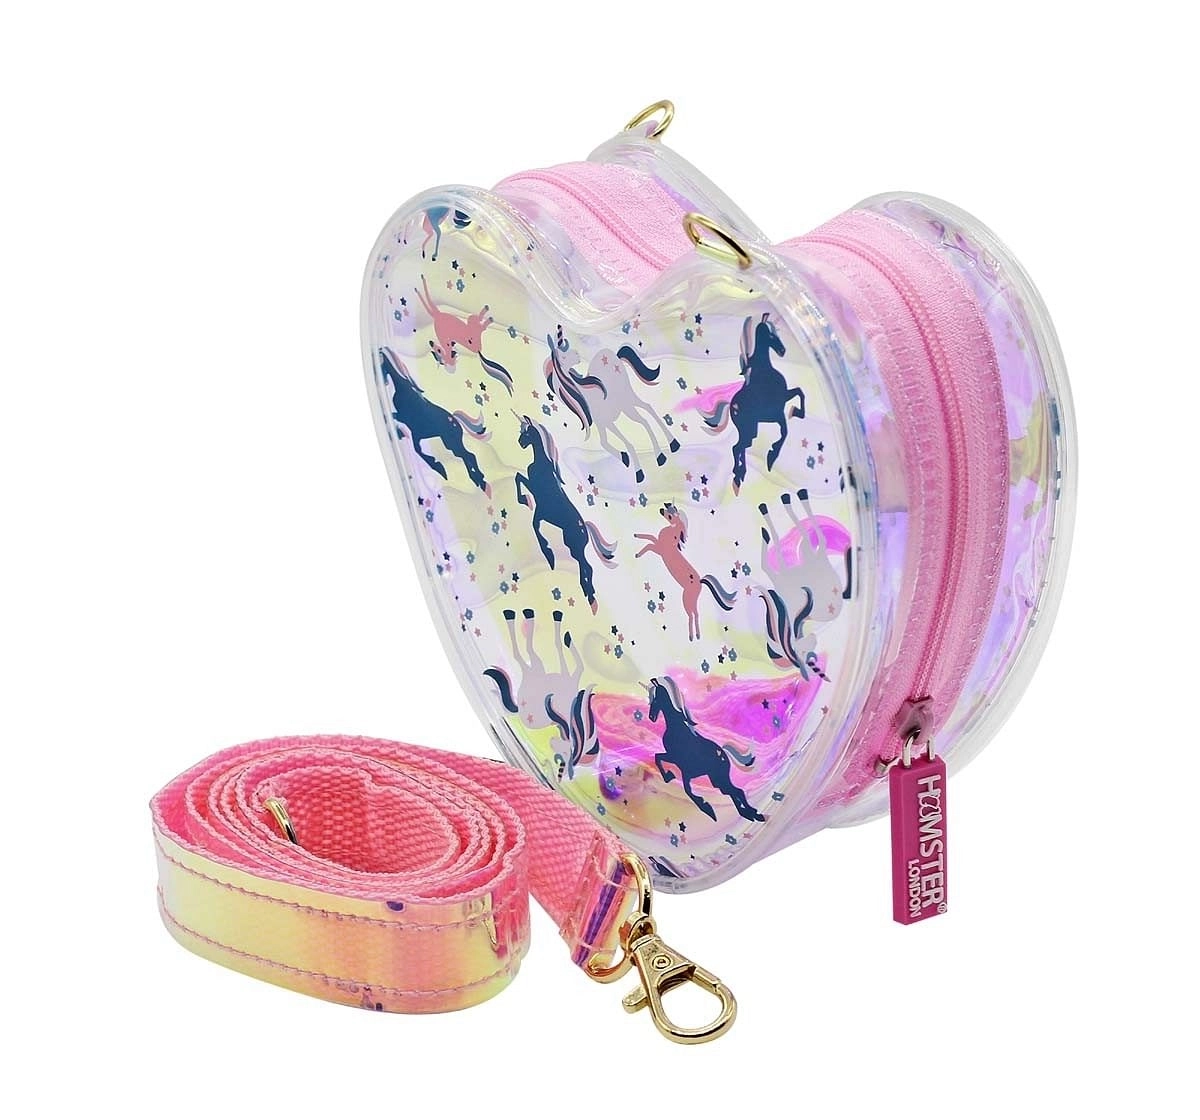 Hamster London Heart Sling Bag Unicorn Bags for Age 3Y+ (Pink)